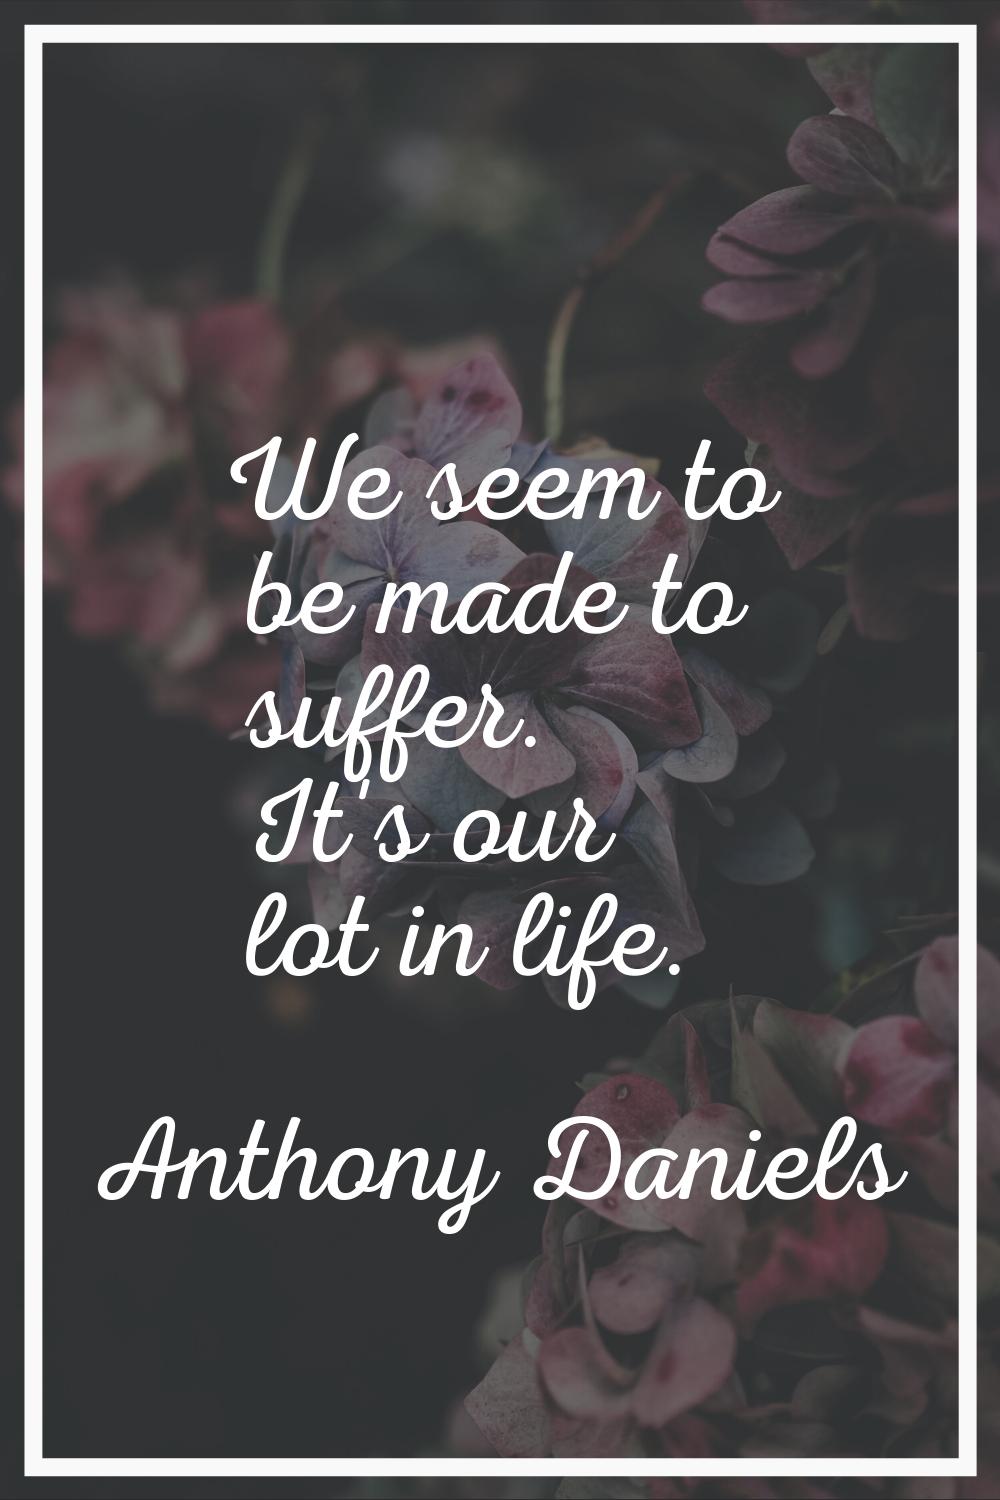 We seem to be made to suffer. It's our lot in life.